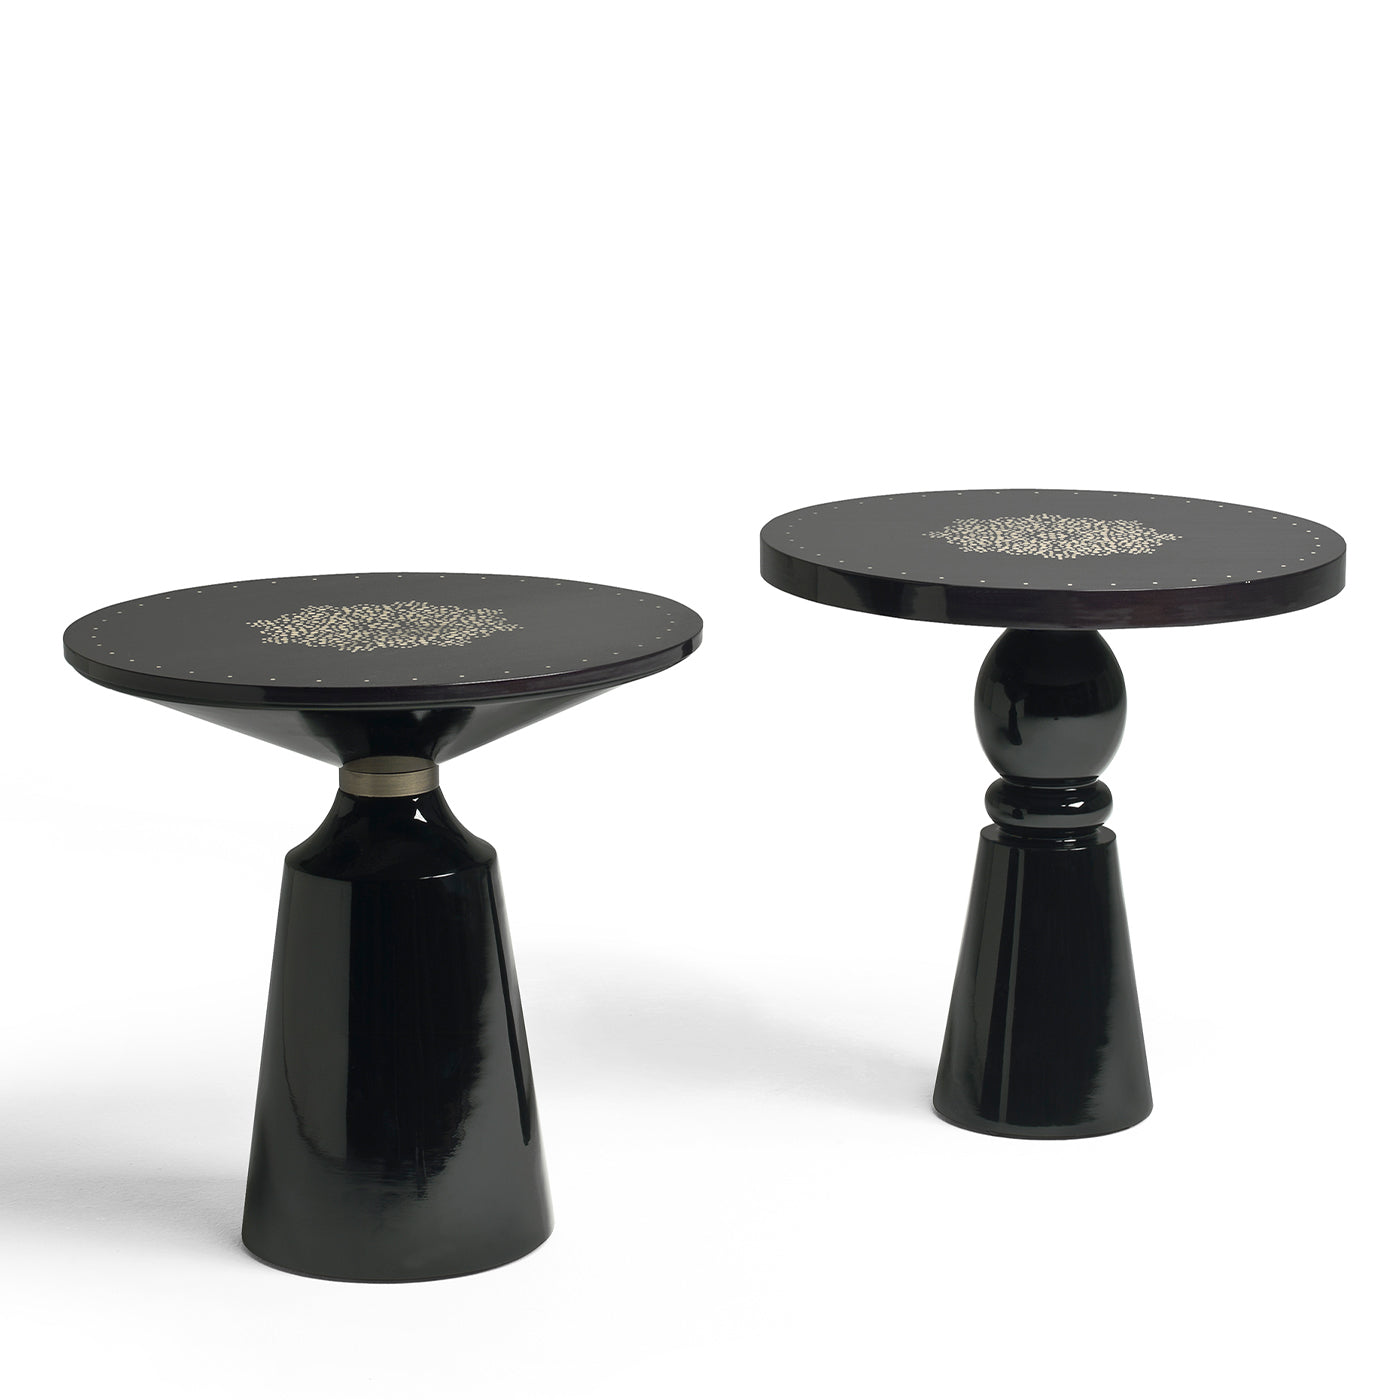 Mercer Bistro Table by Archer Humphryes Architects - Alternative view 1